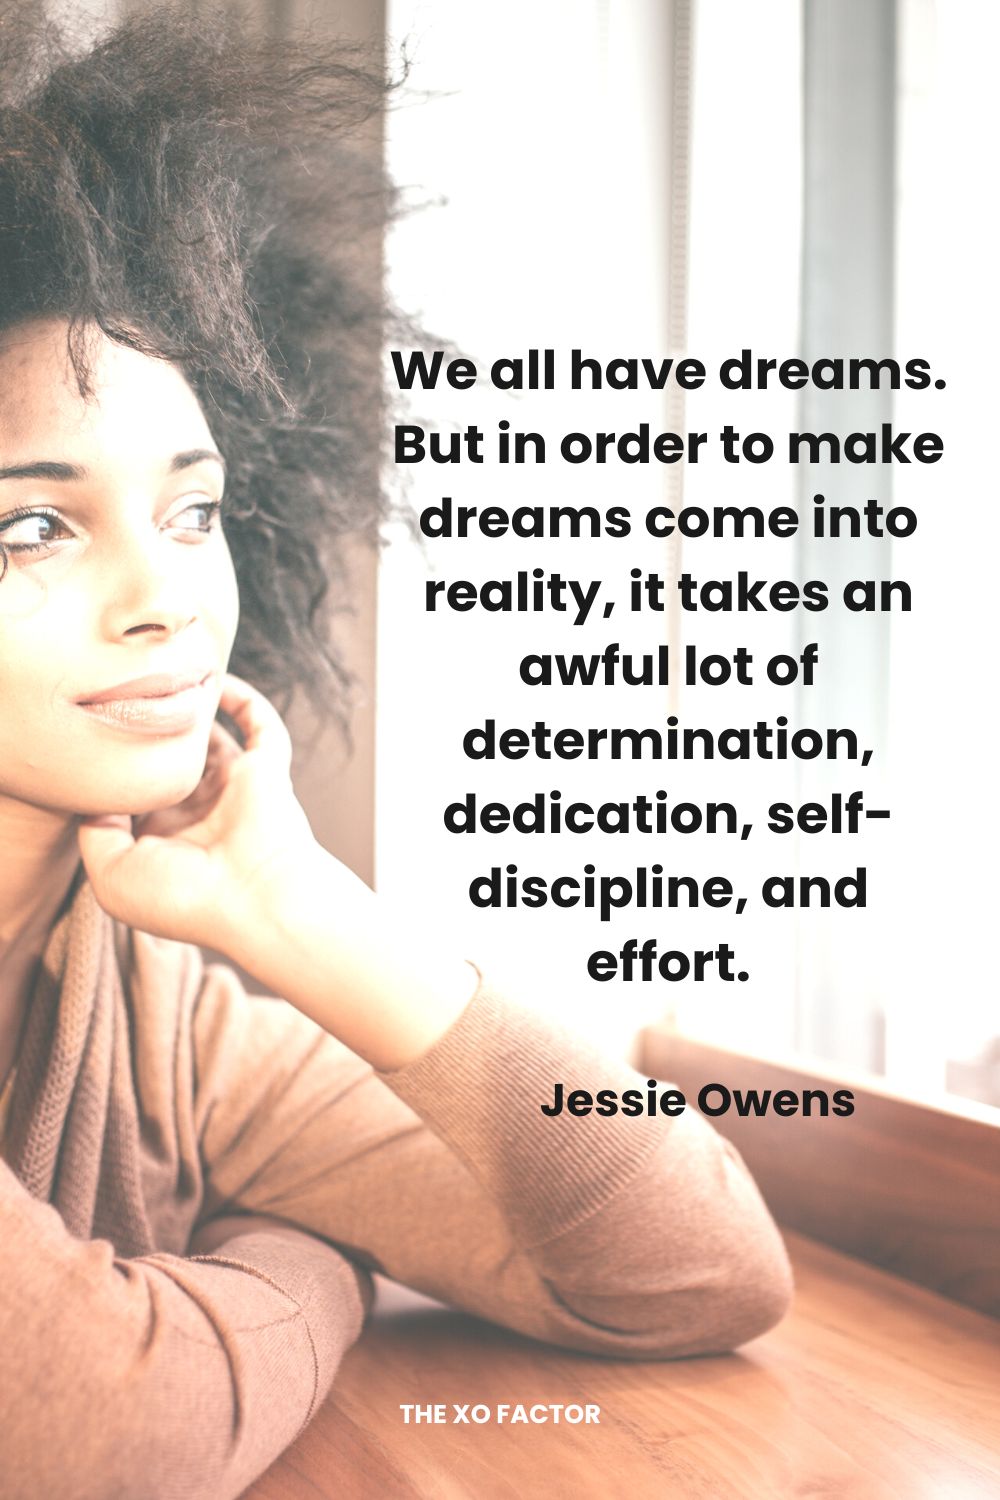 We all have dreams.  But in order to make dreams come into reality, it takes an awful lot of determination, dedication, self-discipline, and effort. Jessie Owens